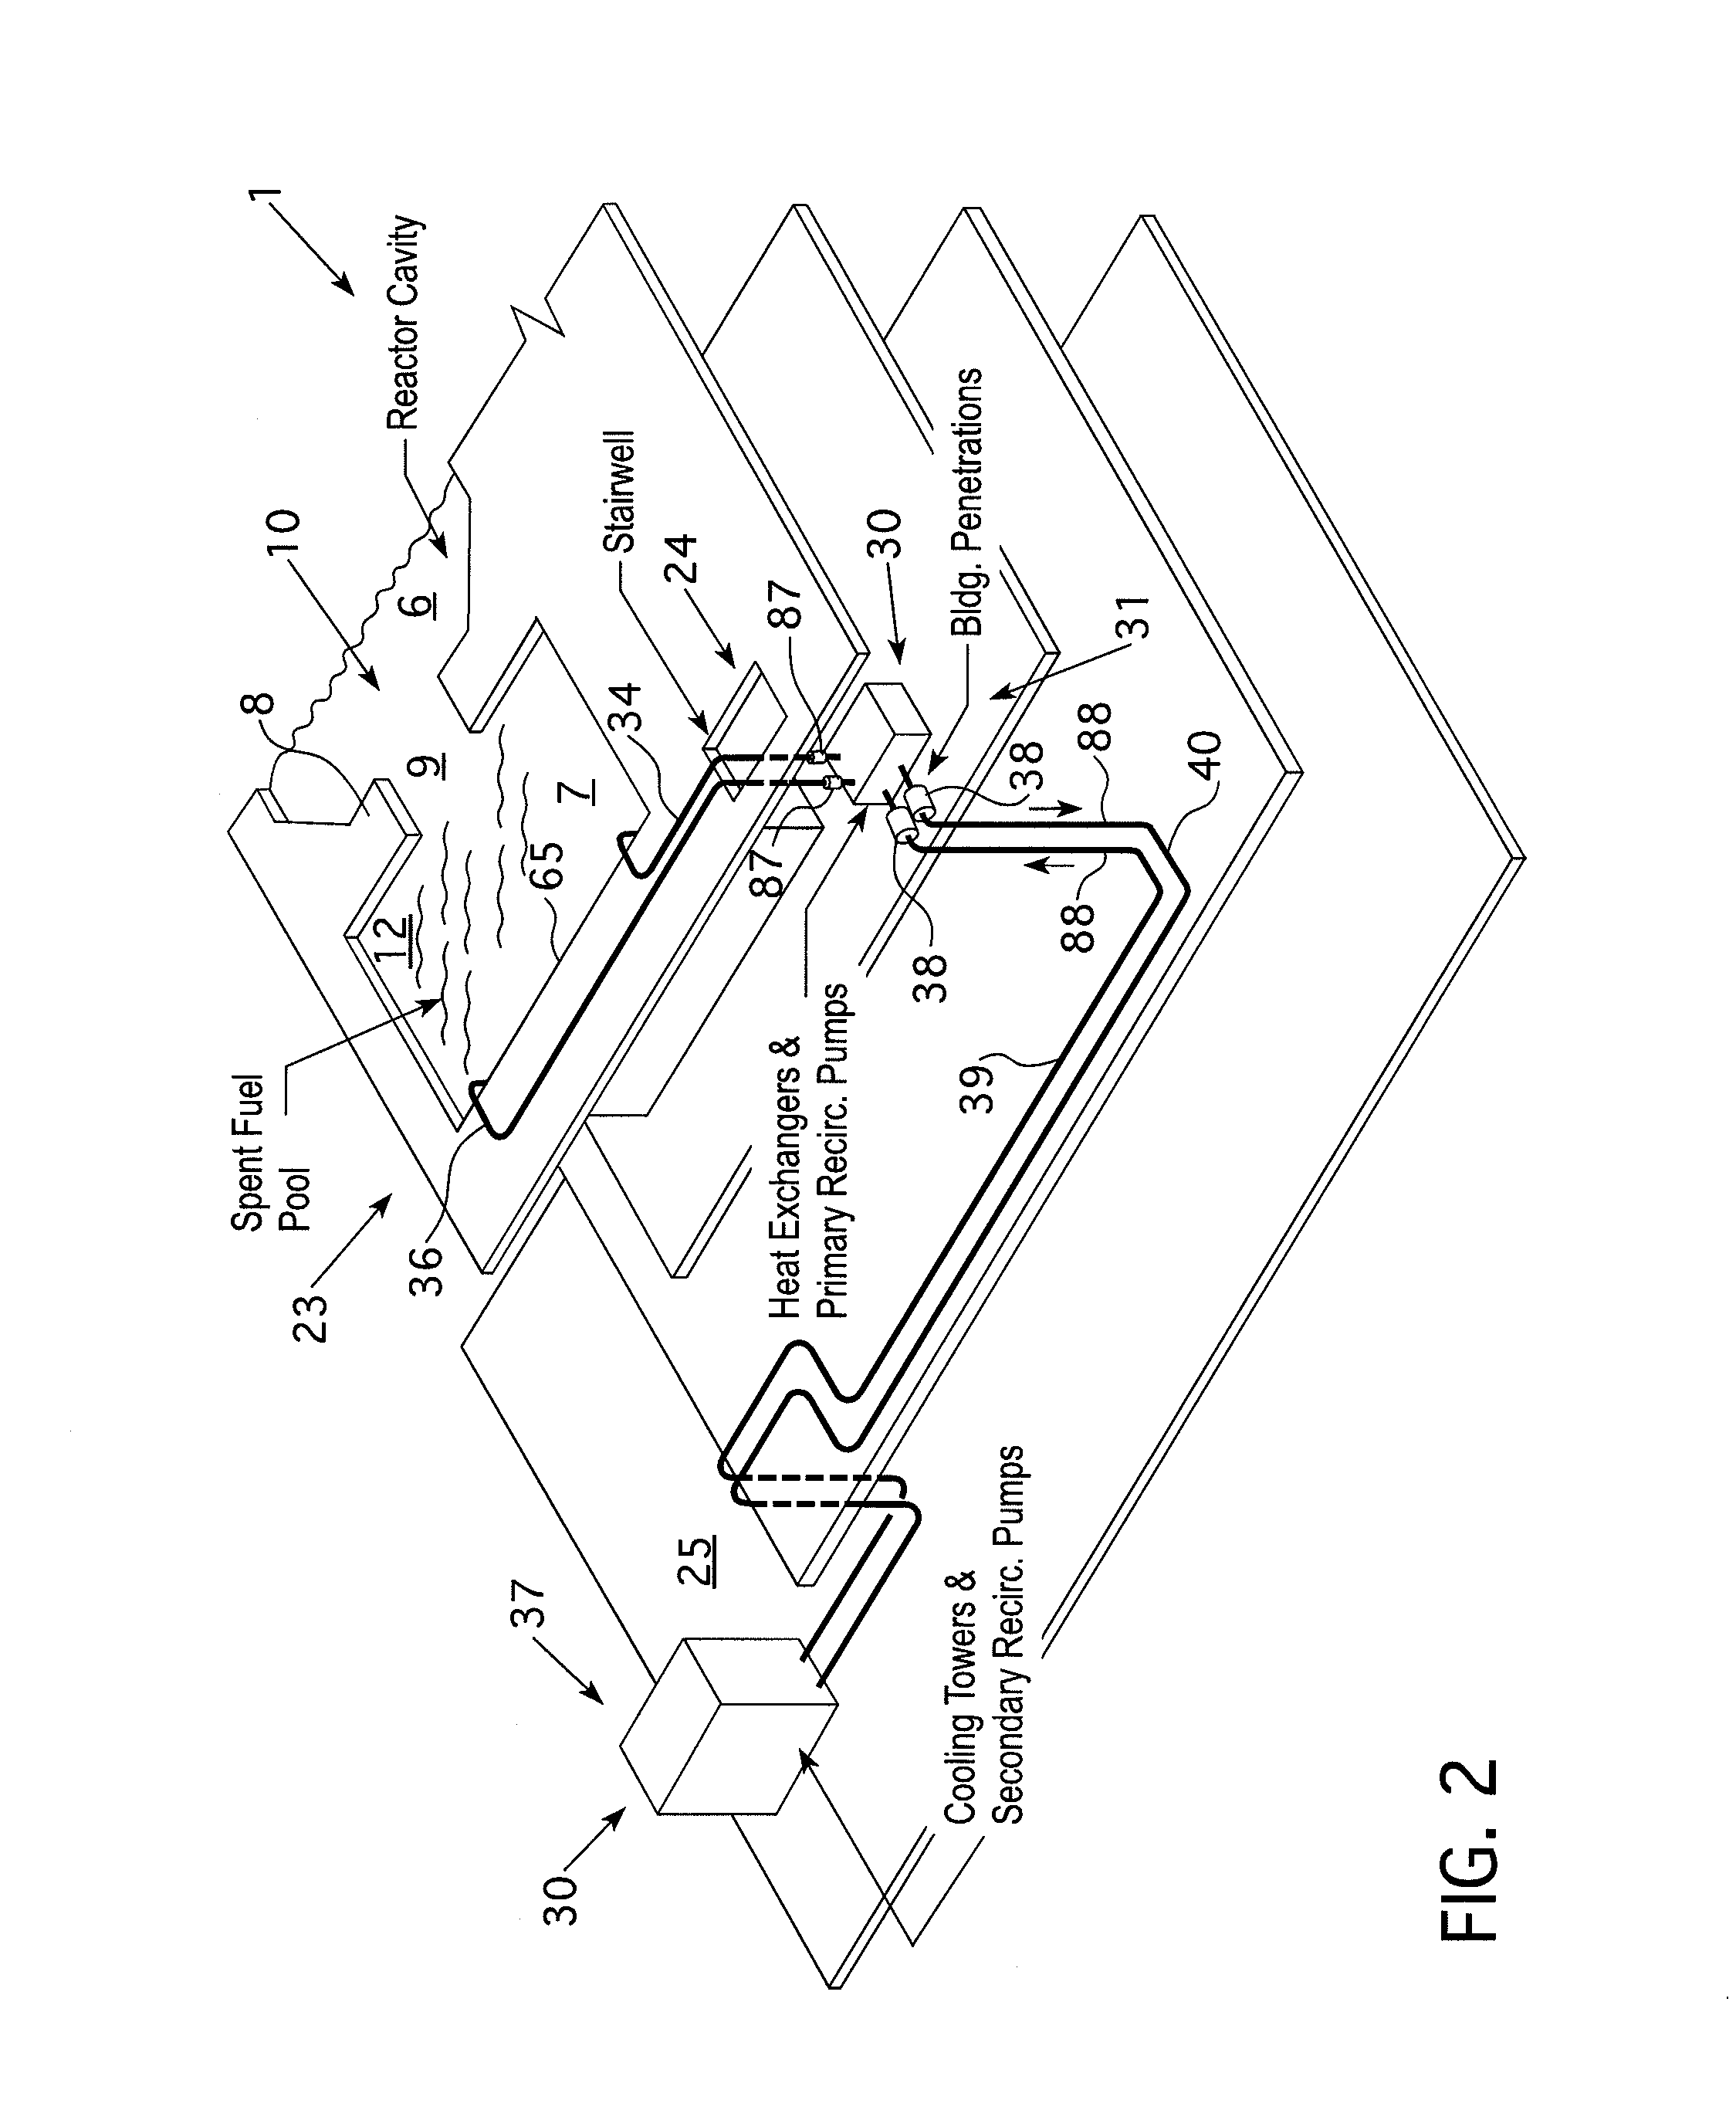 Semi-portable emergency cooling system for removing decay heat from a nuclear reactor